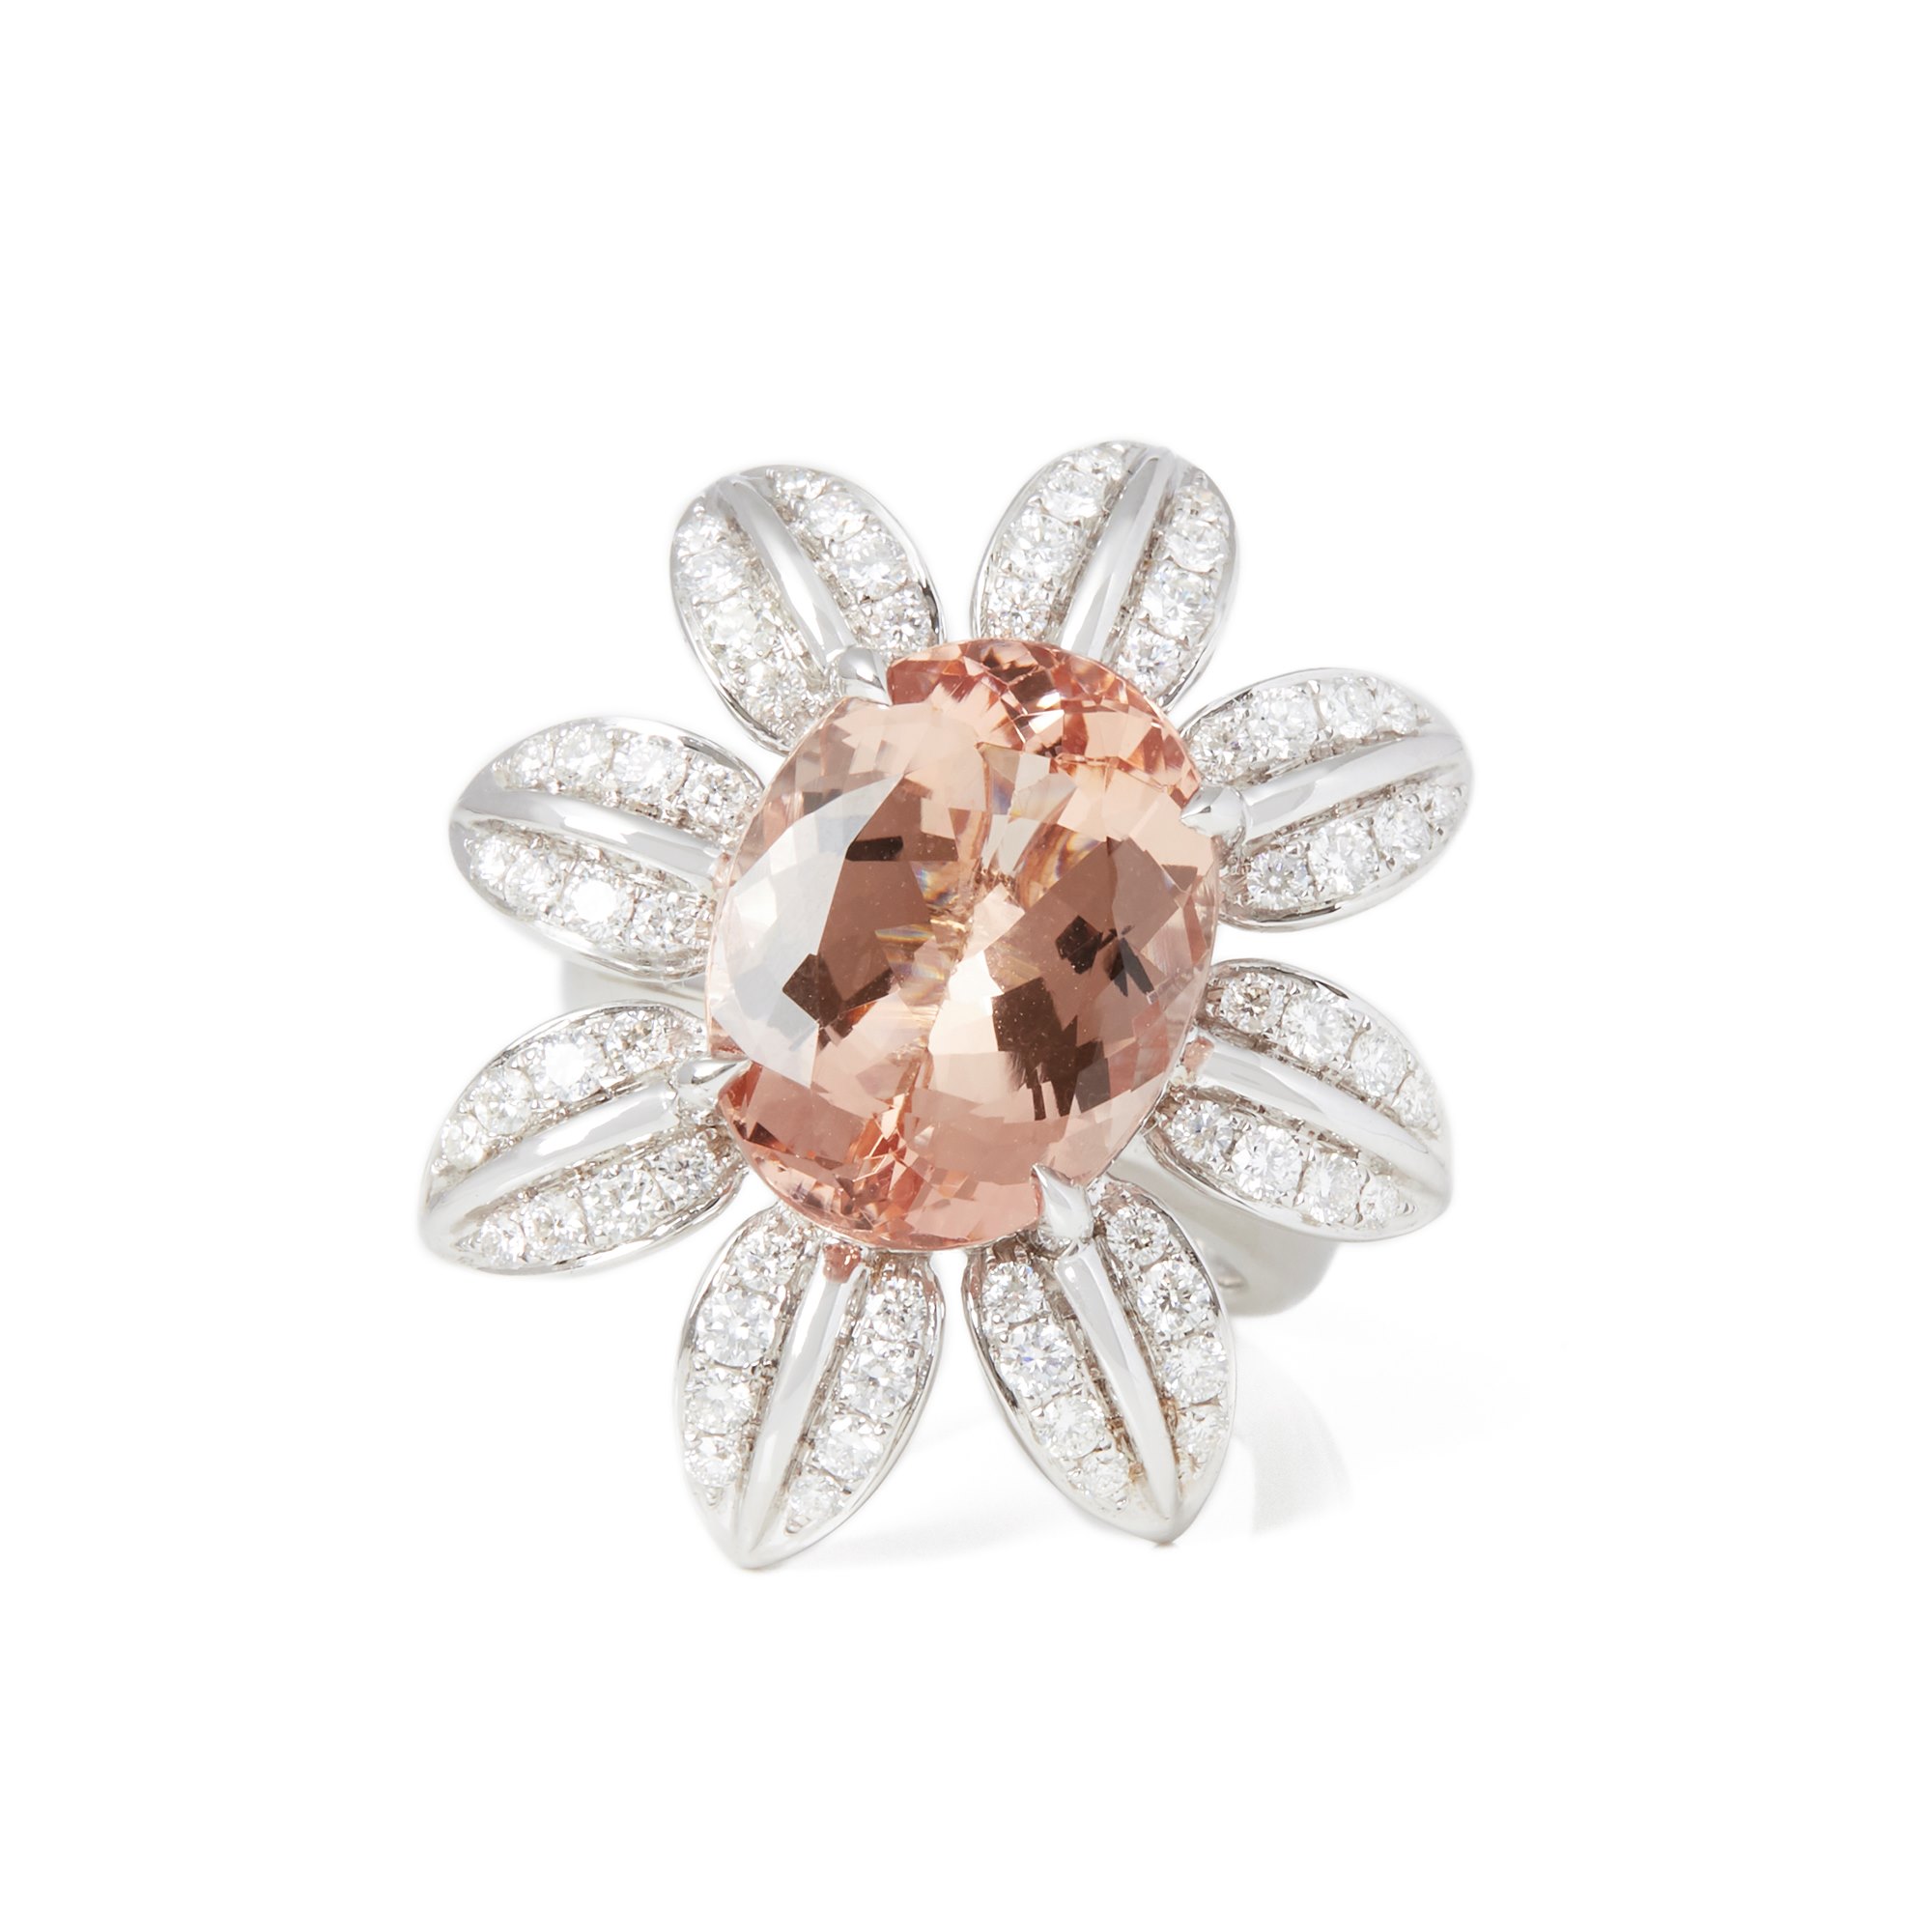 David Jerome Certified 8.86ct Oval Cut Morganite and Diamond 18ct Gold Ring